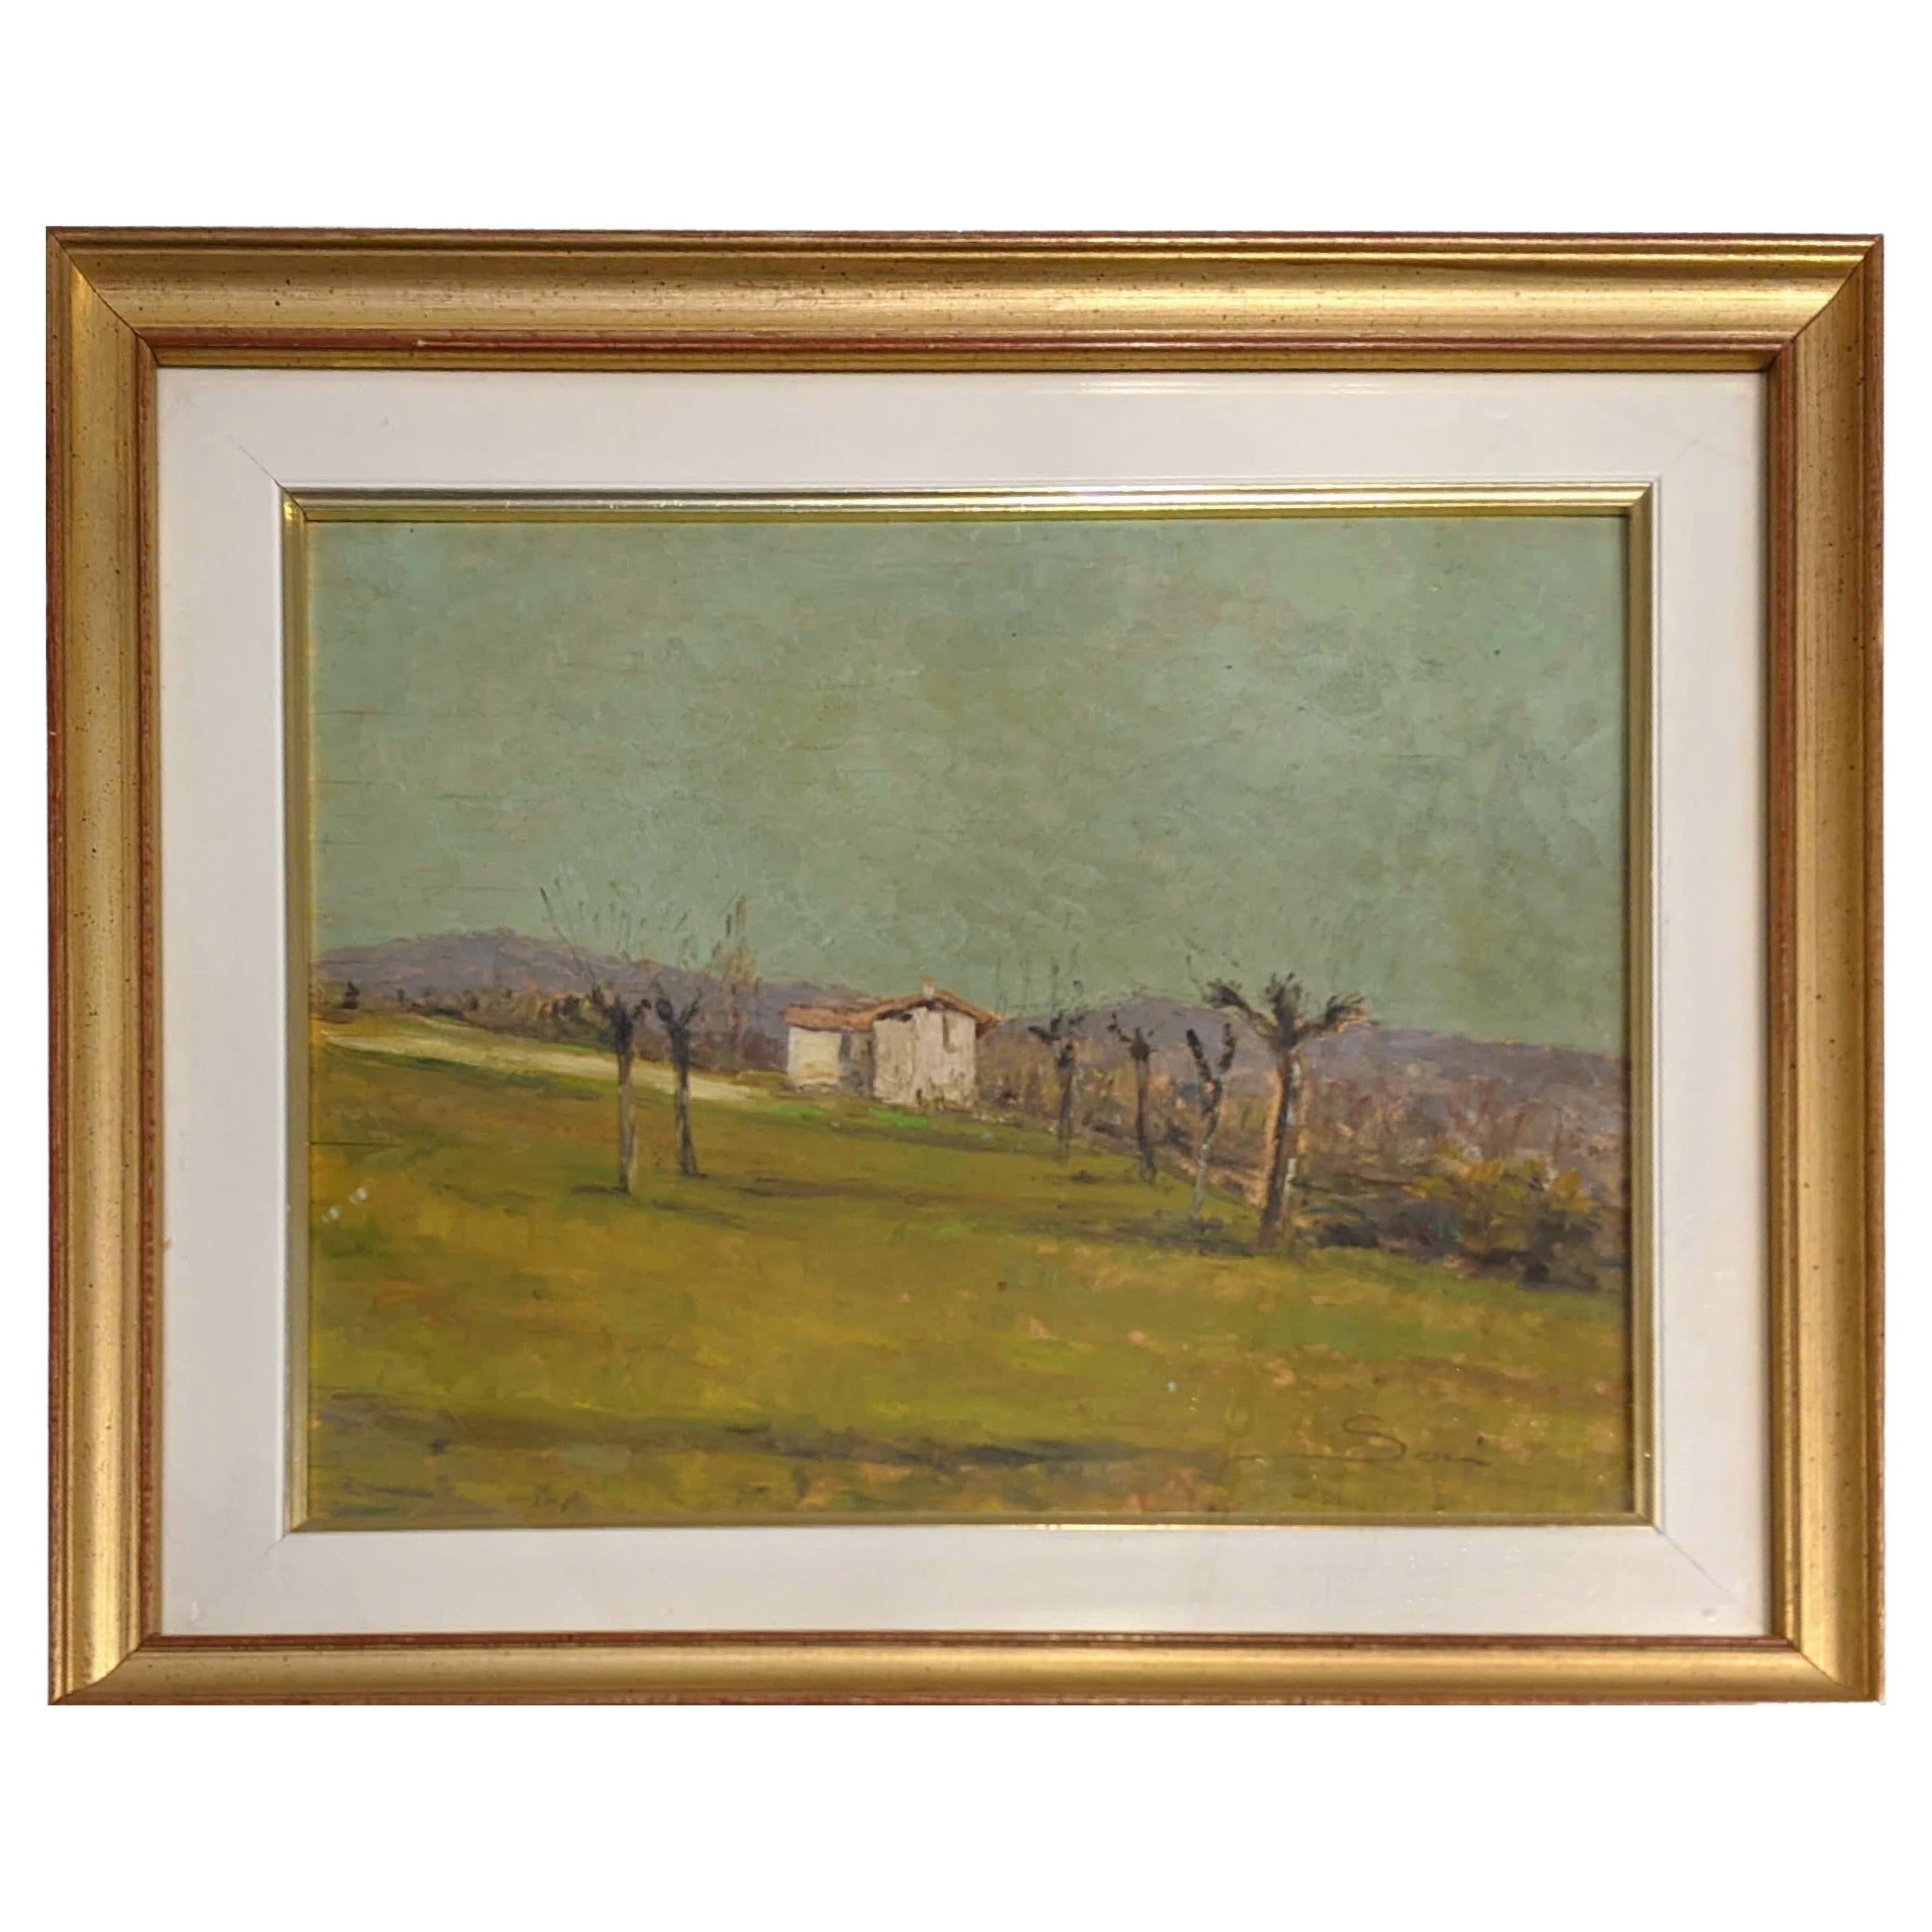 Country Landscape, Oil on Canvas, Early 1900s